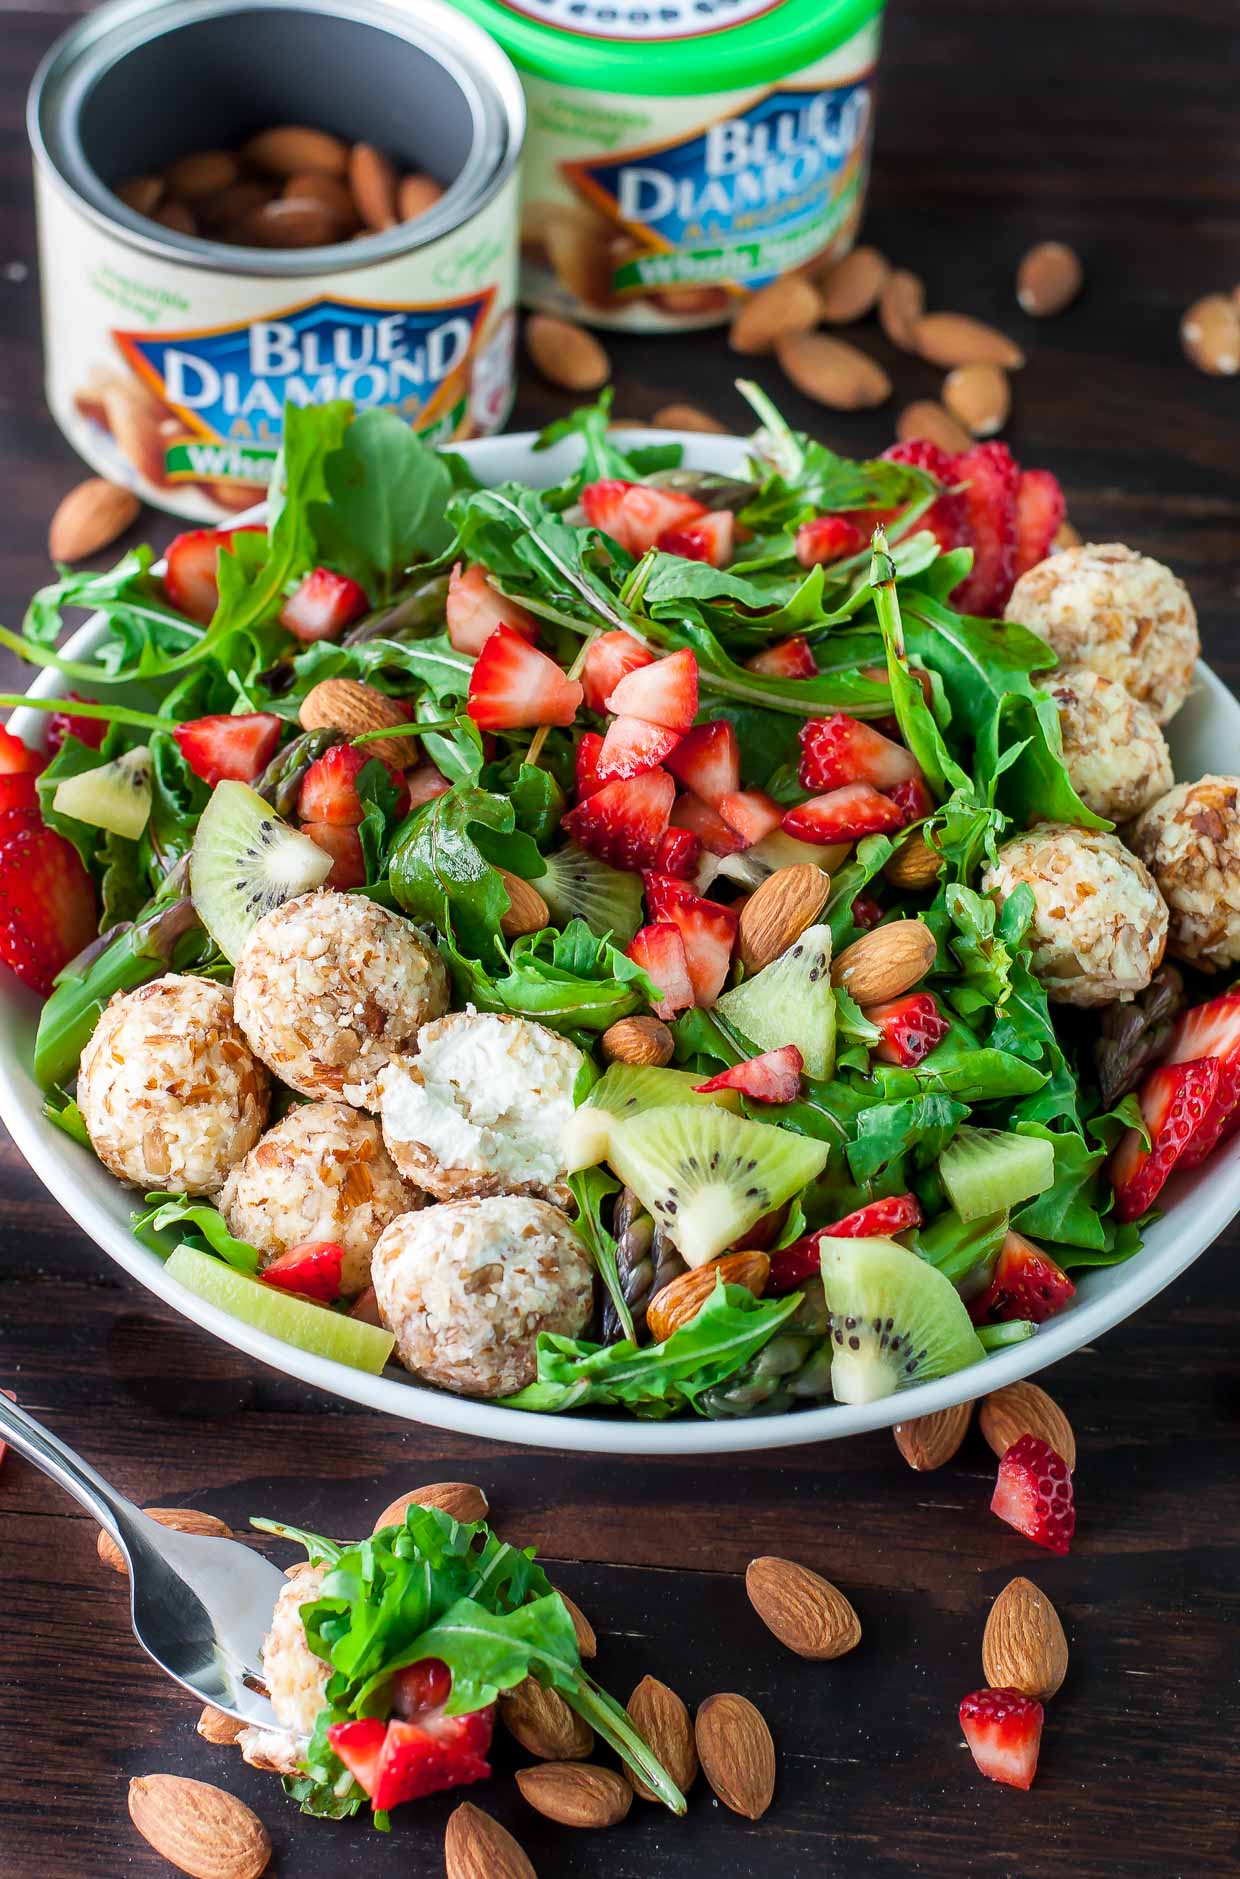 Just say no to boring salads! This sweet and savory Almond Crusted Goat Cheese Salad is flecked with strawberries and kiwi and topped with a fruity balsamic dressing.